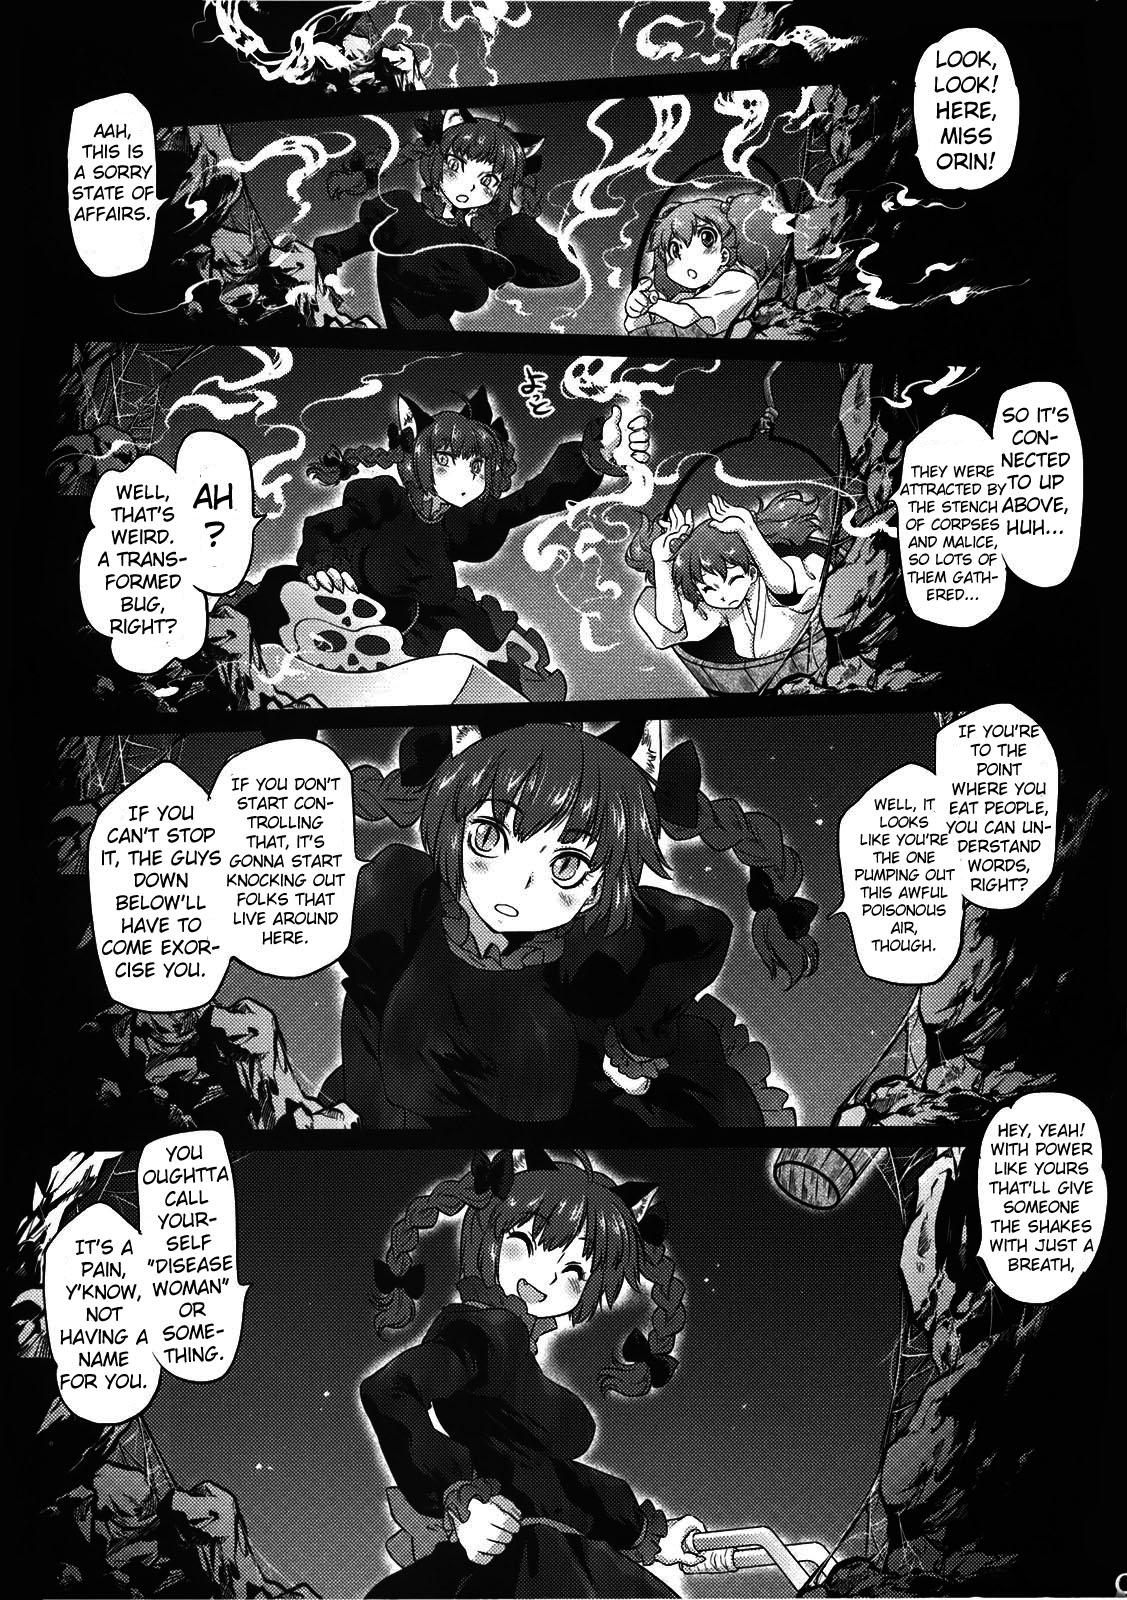 Fuck A Disease Woman's Story - Touhou project Nudist - Page 9